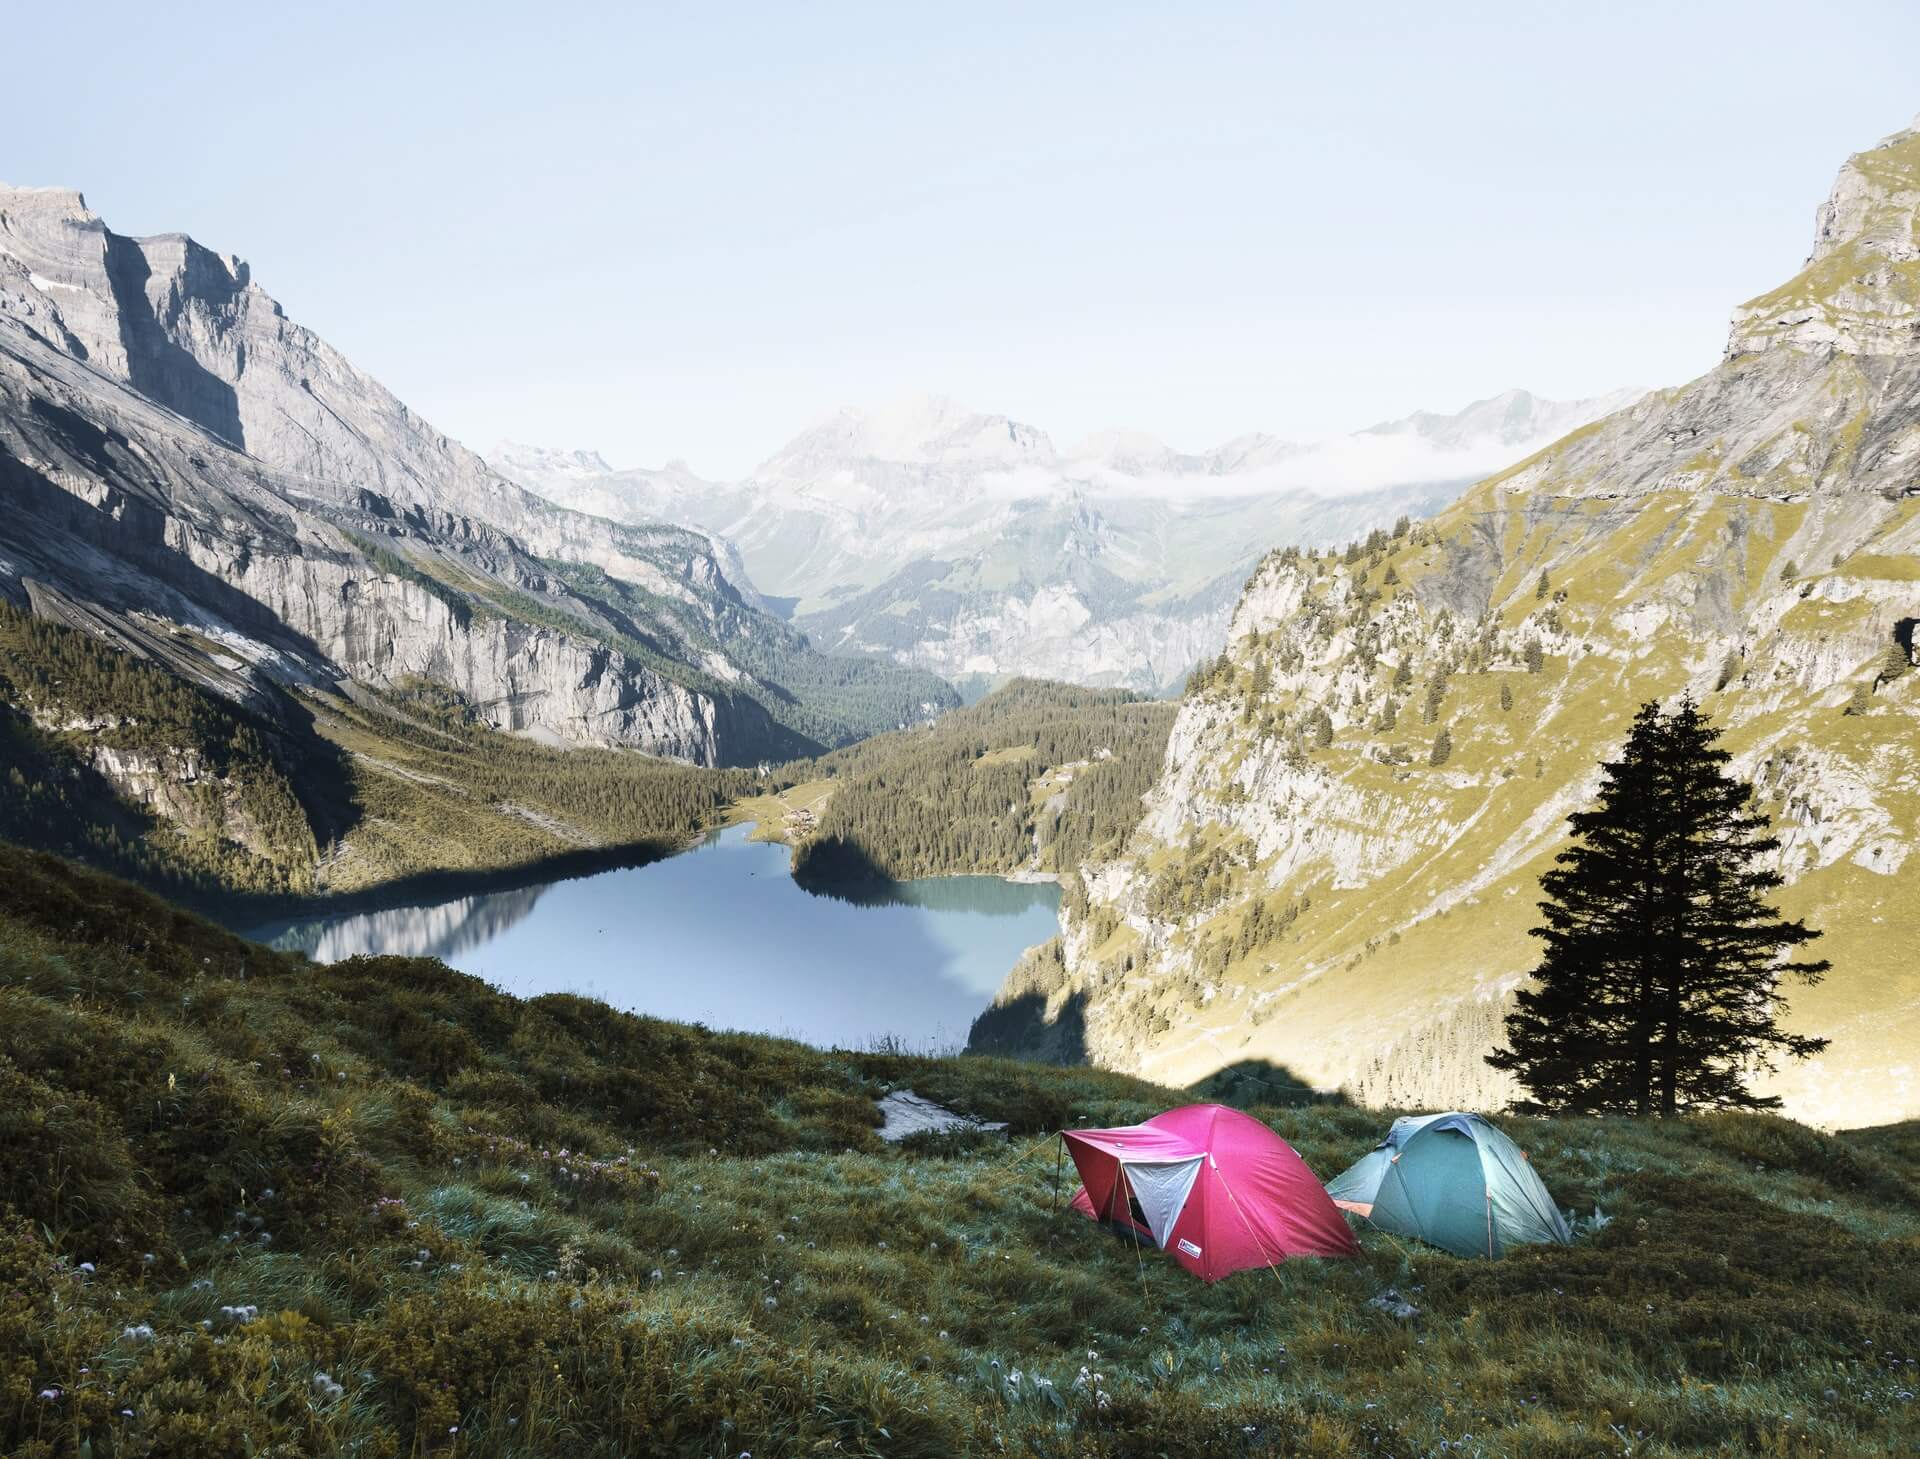 Camping enthusiasts have praised the 5 knowledge